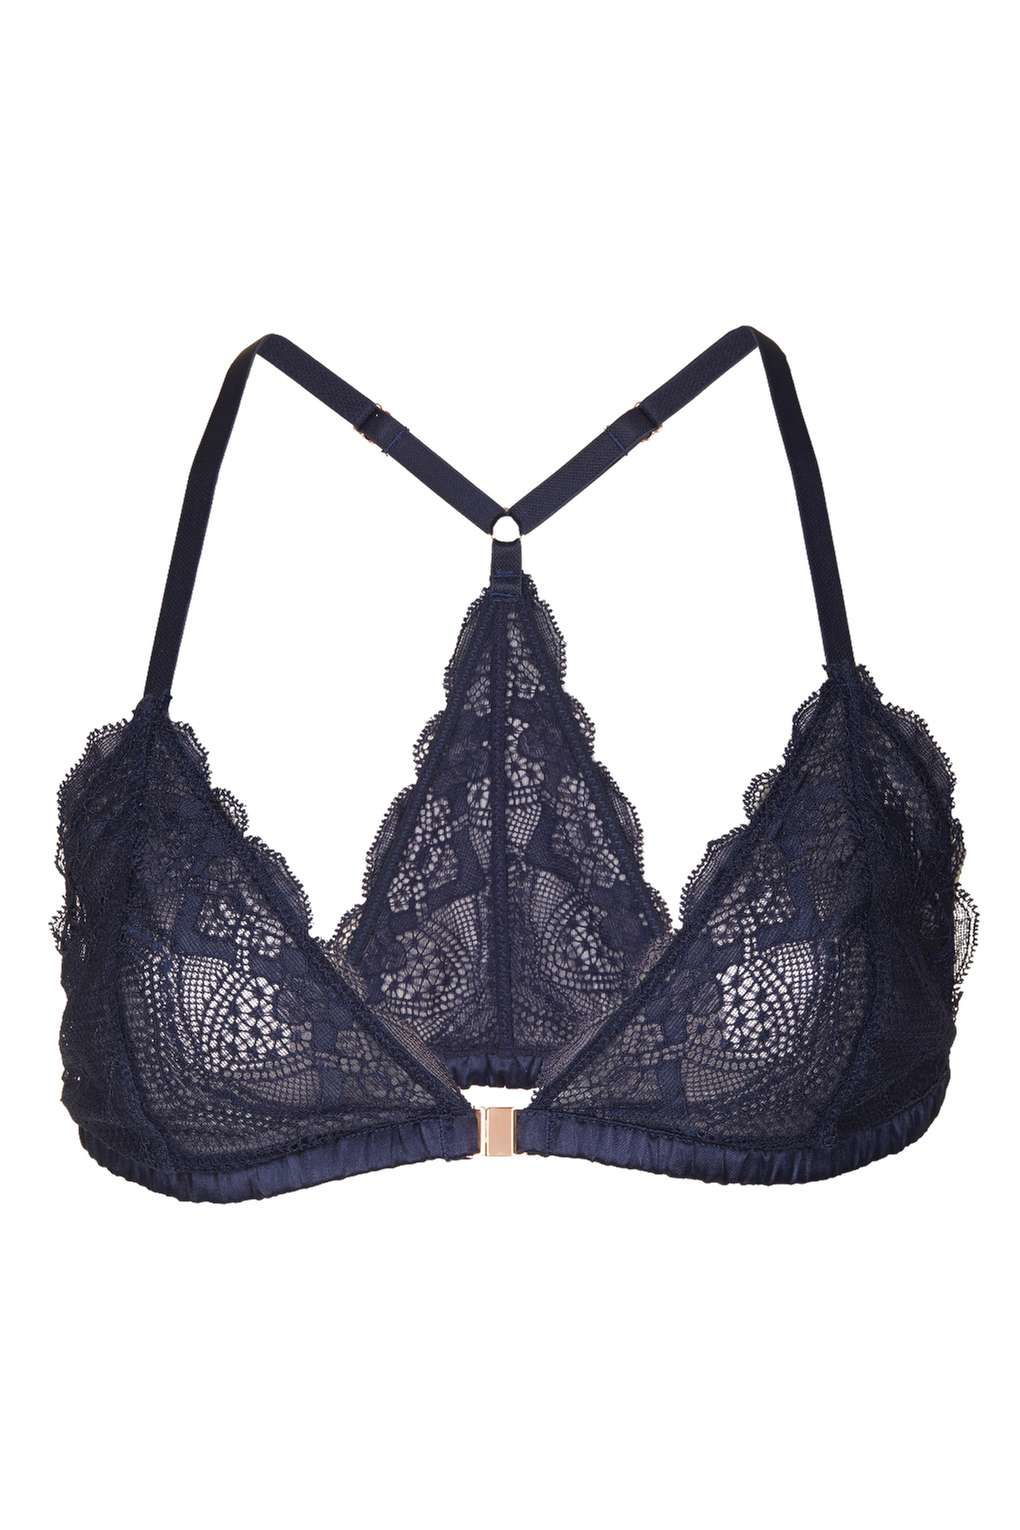 Topshop Lace Lace Racer Back Triangle Bra in Black - Lyst